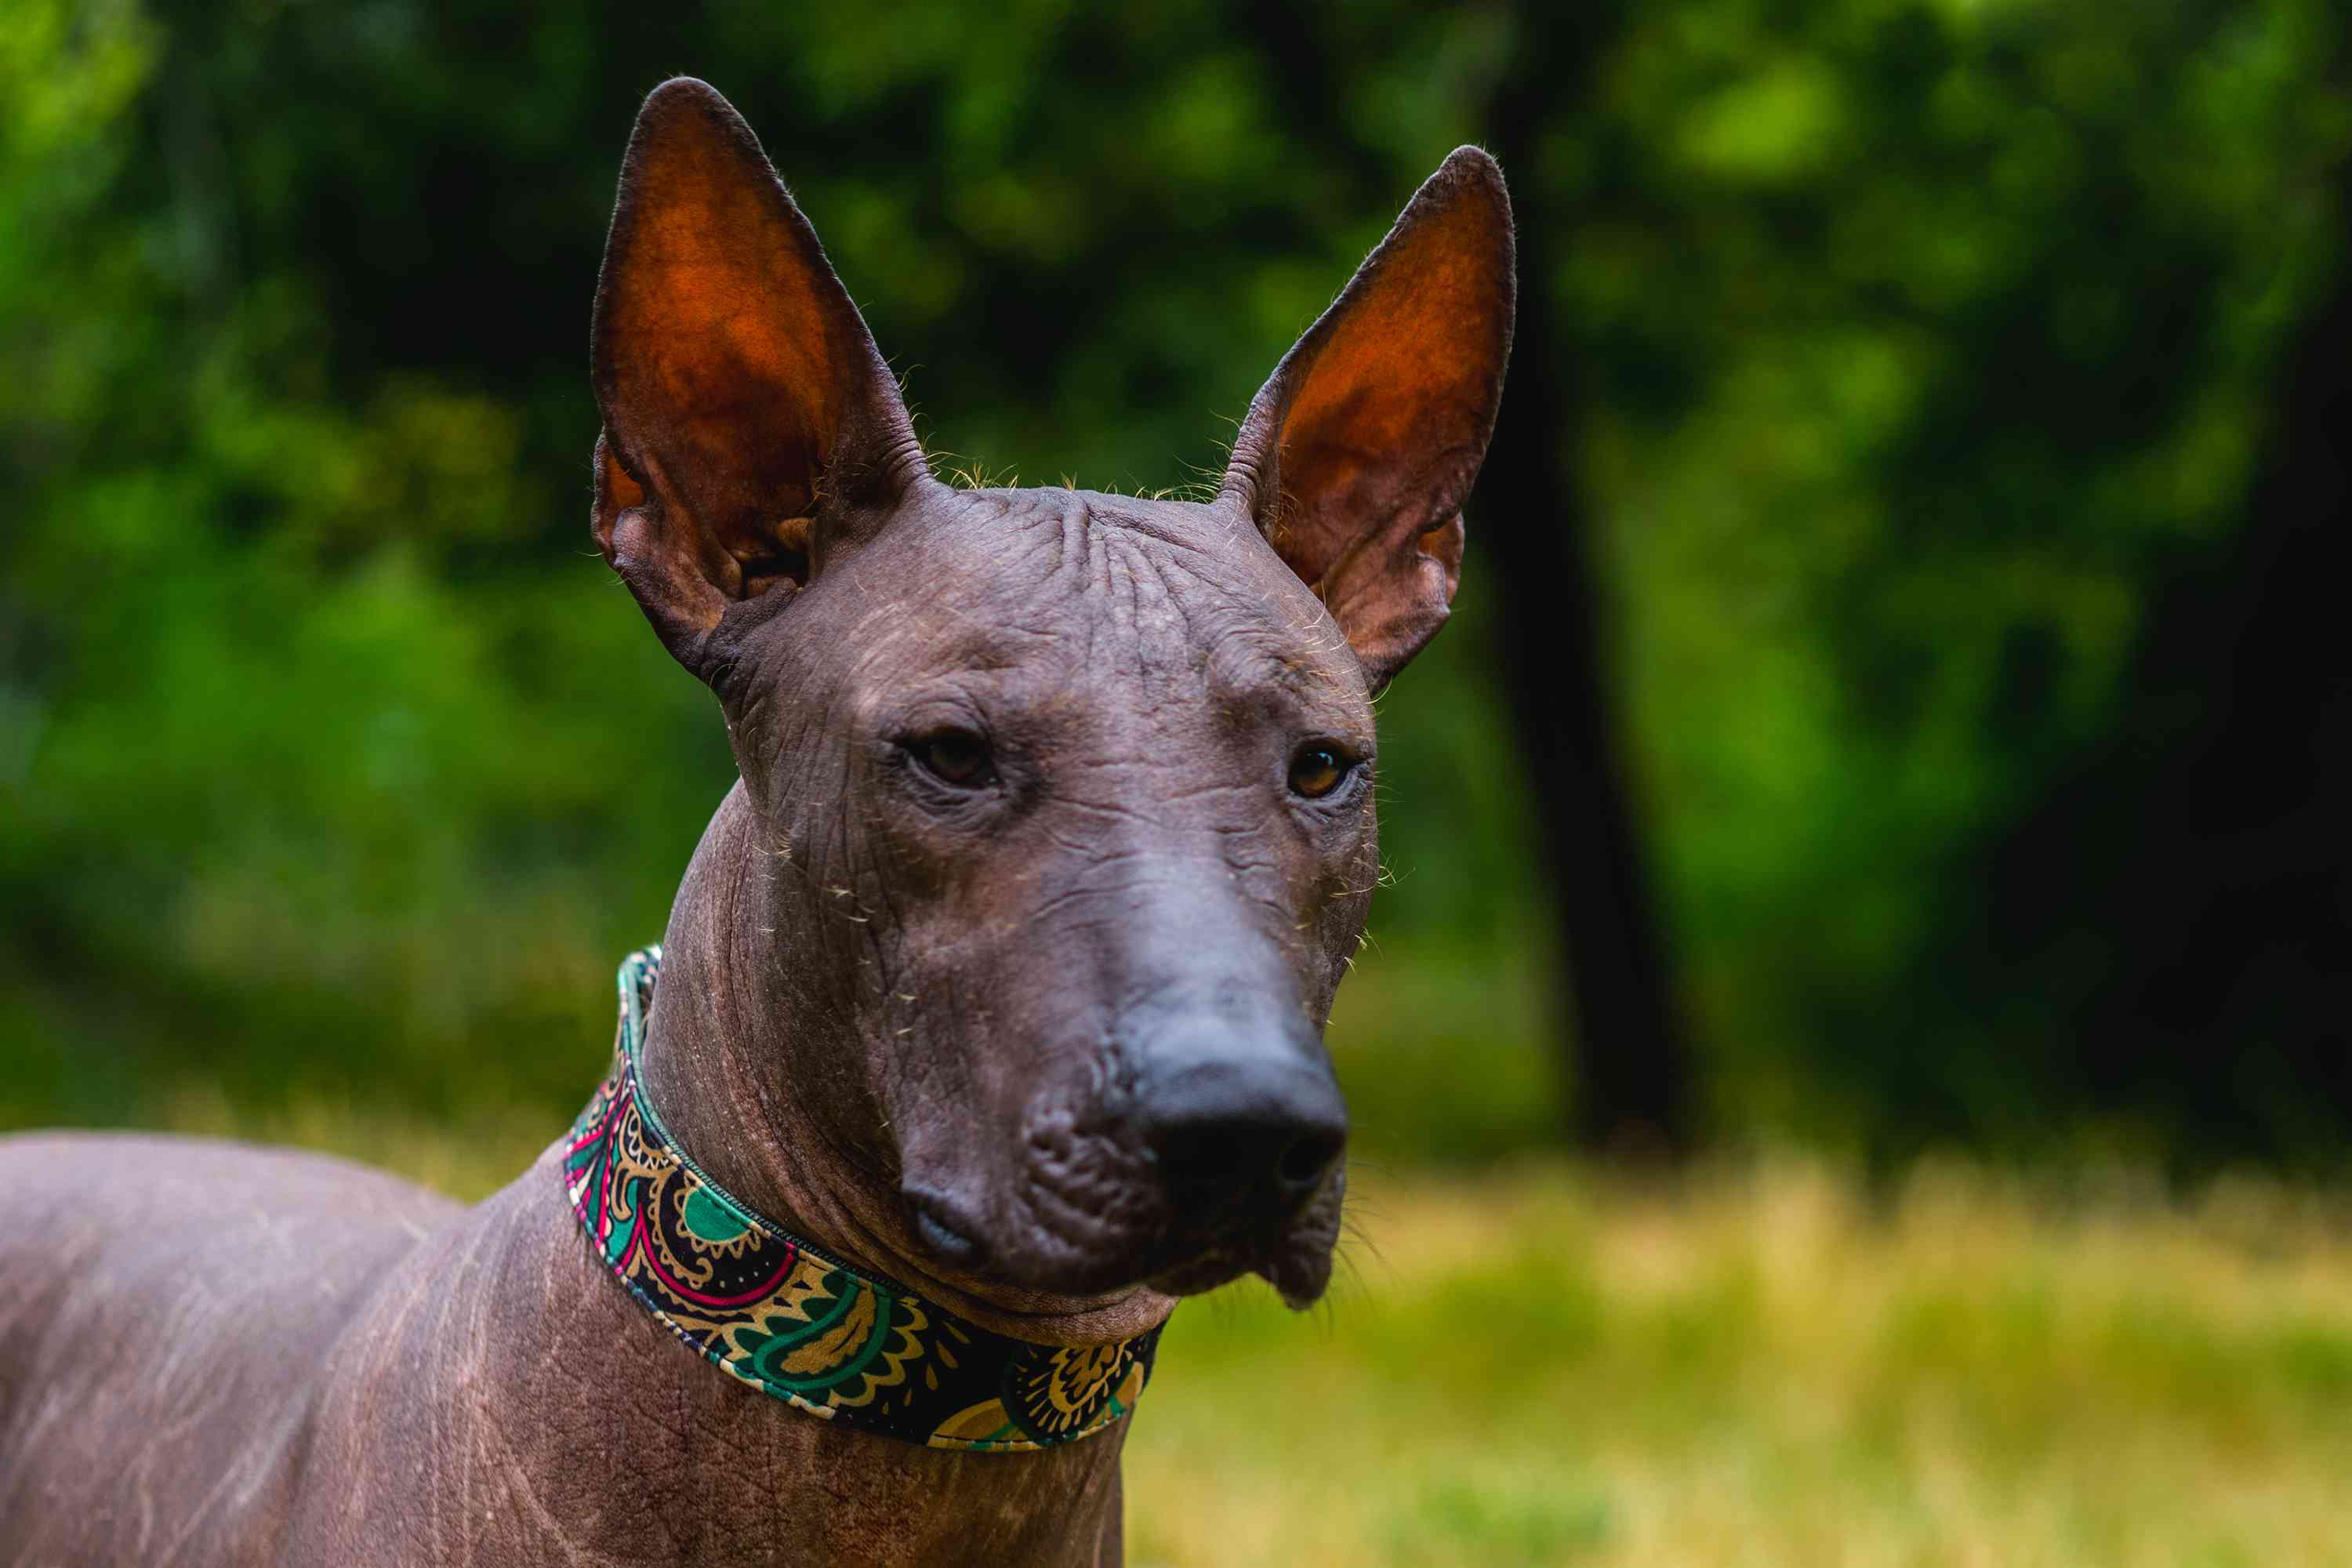 A Mexican Hairless dog with black skin, pink ears, and a wrinkly forehead.